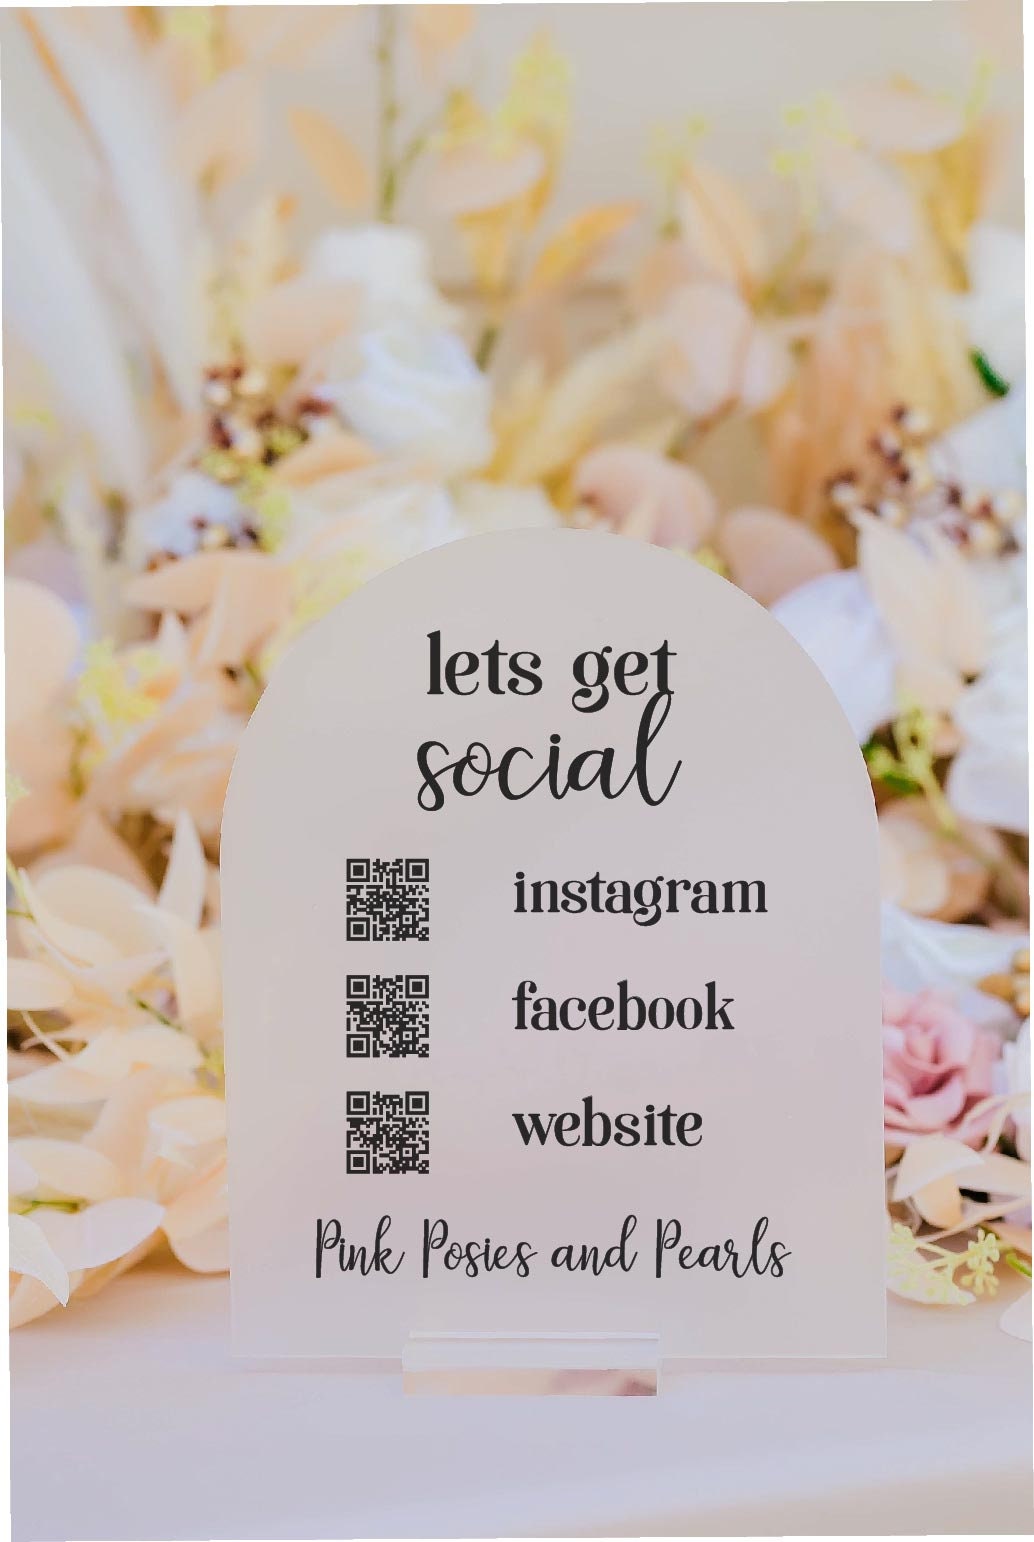 Lets Get Social Follow Us Or Leave A Review Retail Scannable QR Code Acrylic Sign, Instagram Hashtag Plexiglass Perspex Lucite Table